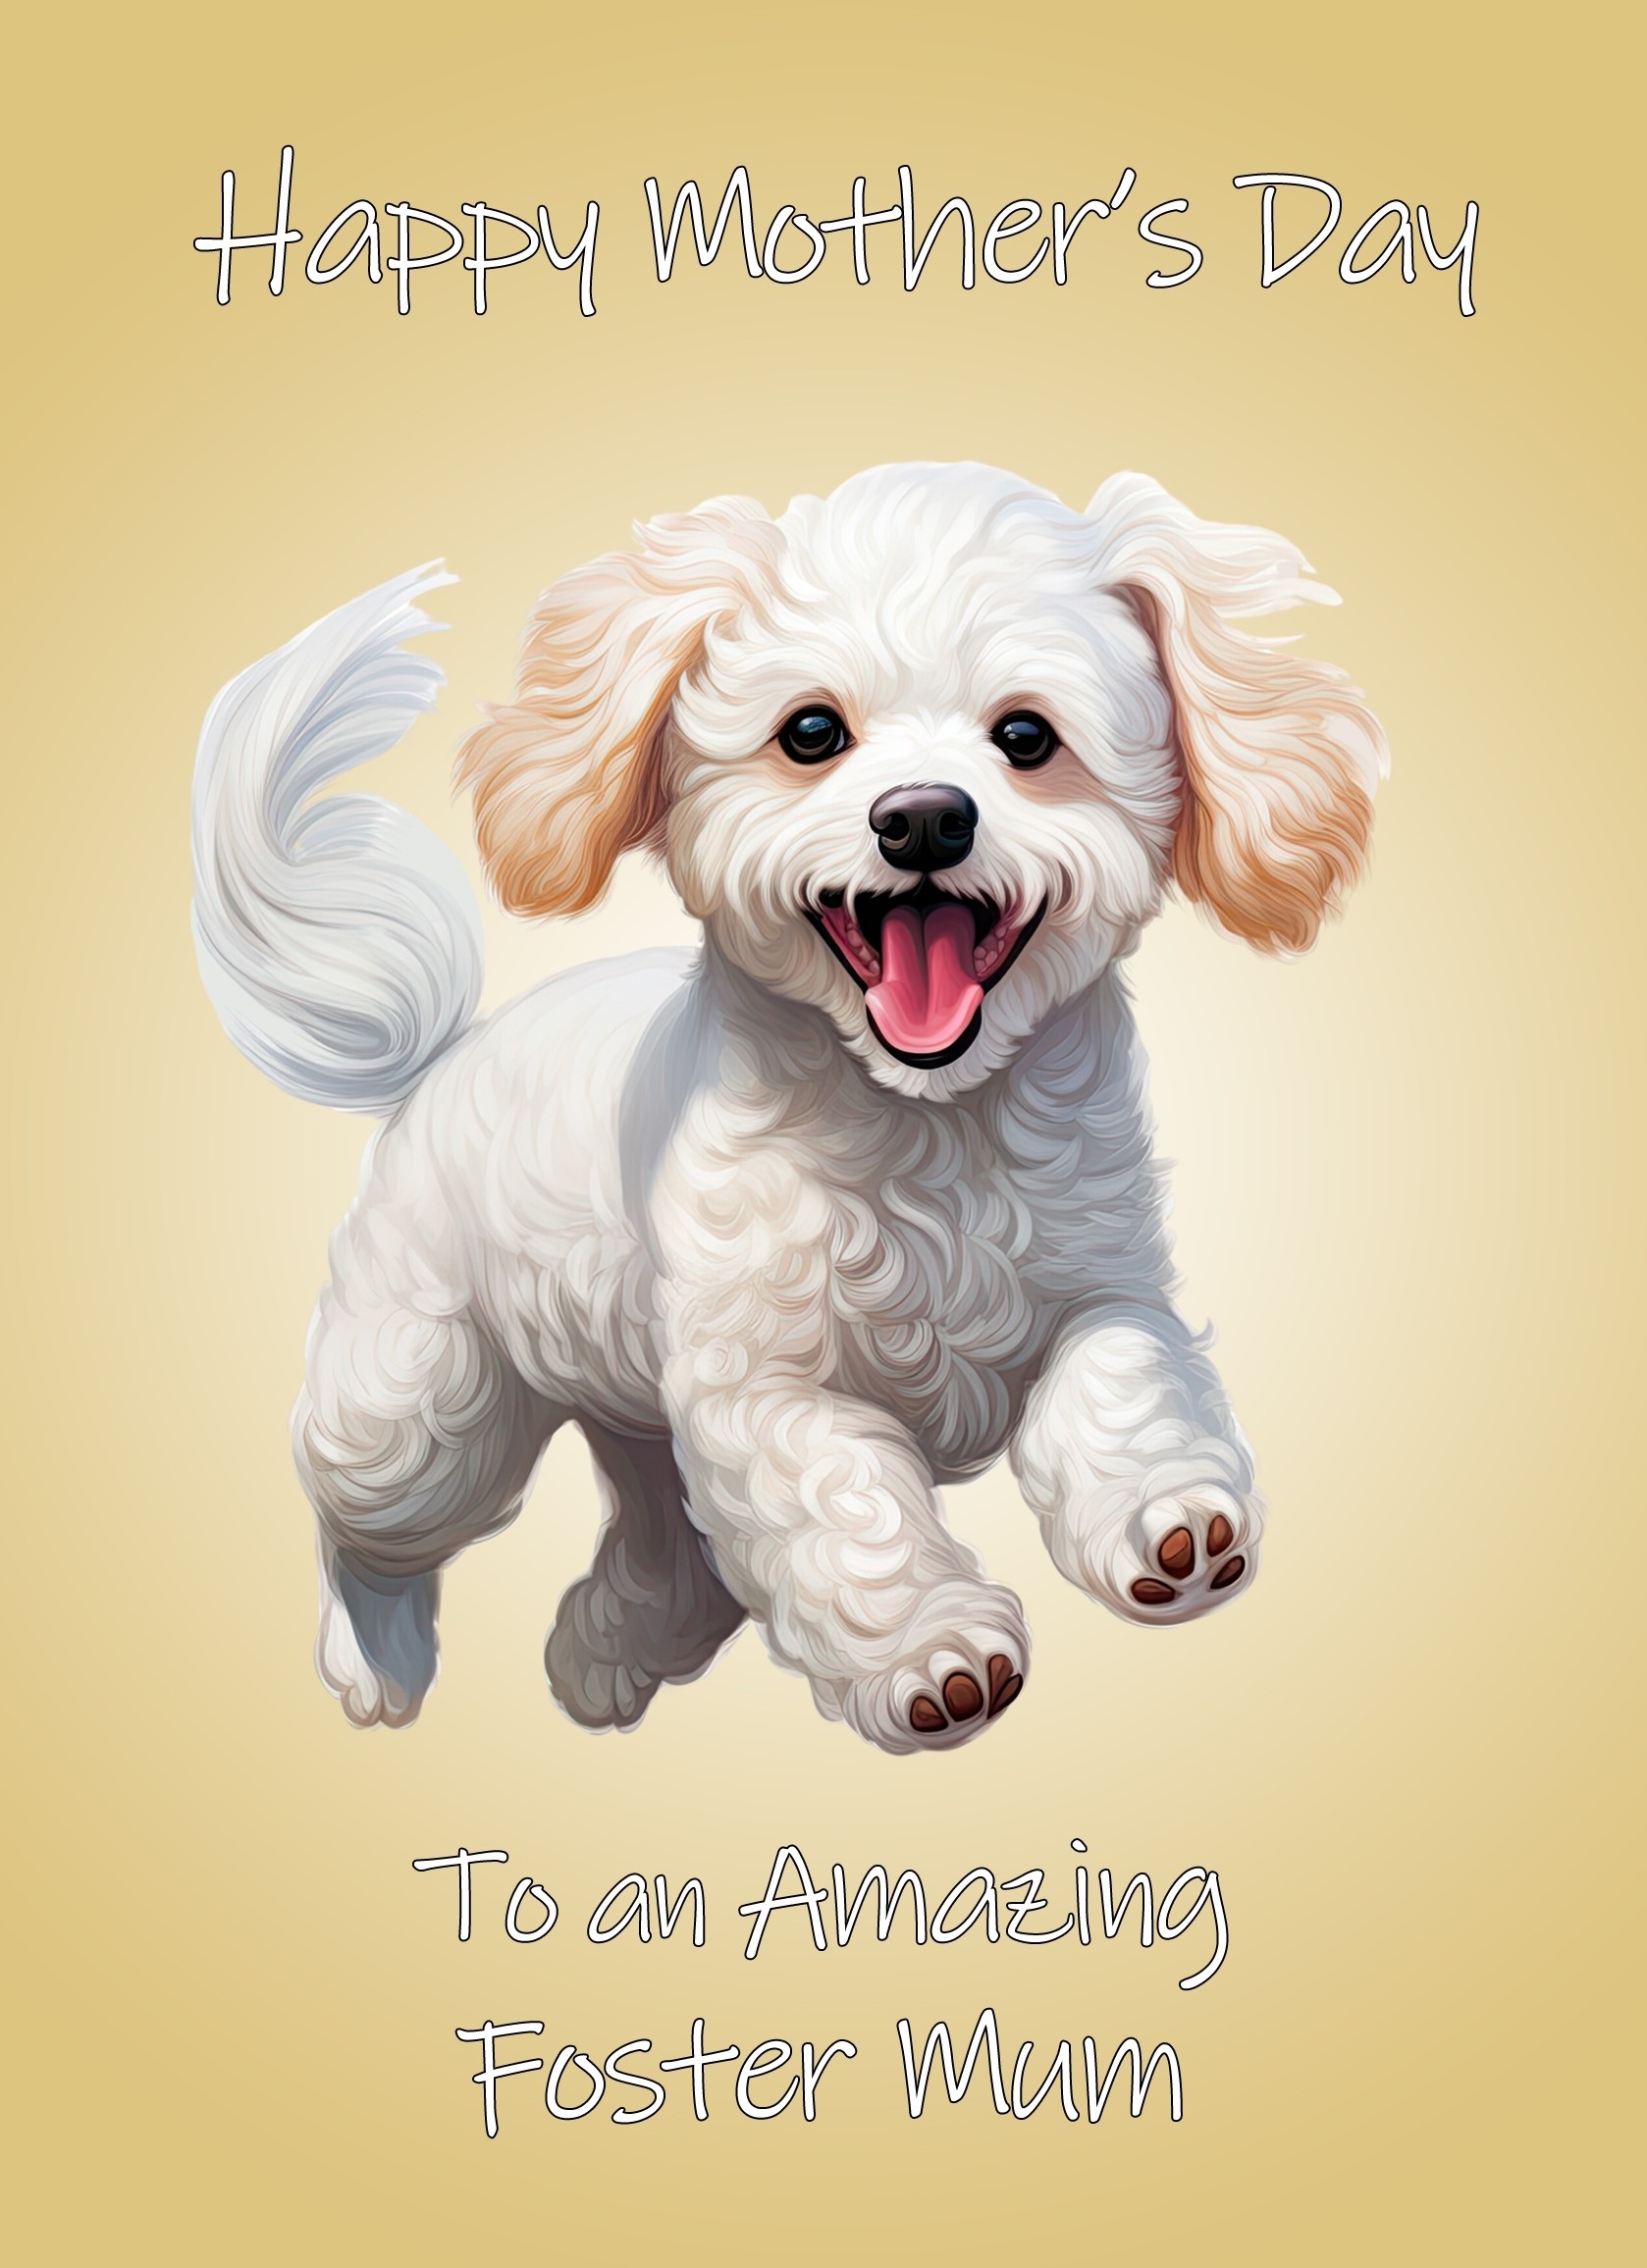 Poodle Dog Mothers Day Card For Foster Mum